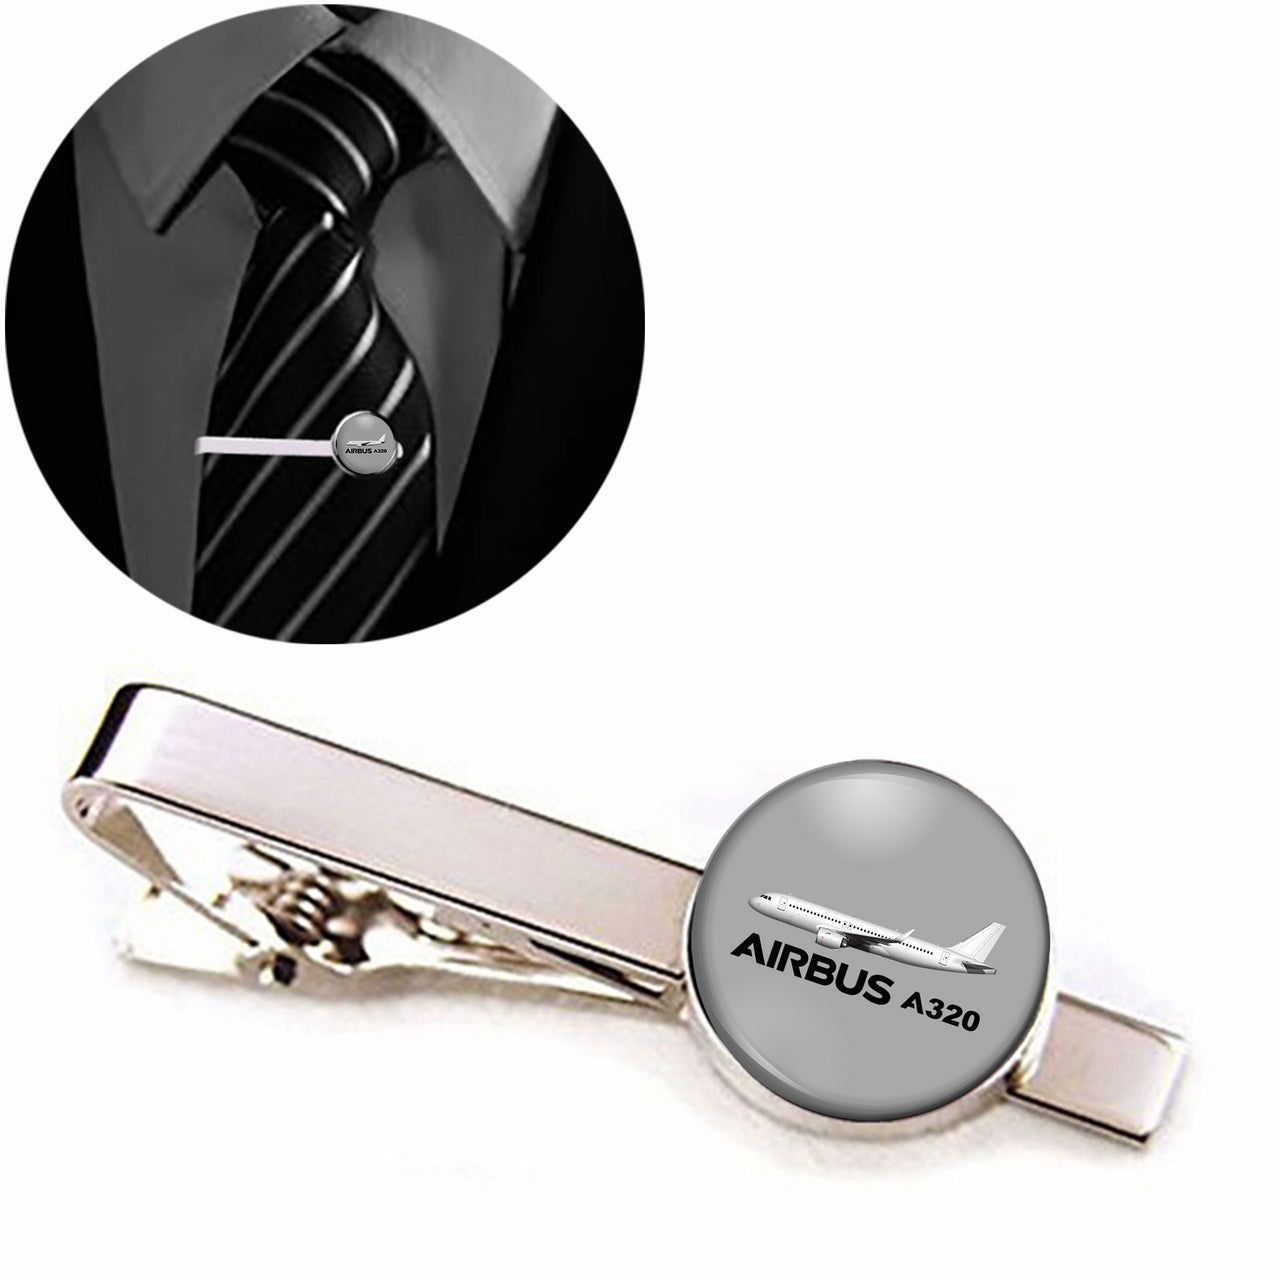 The Airbus A320 Designed Tie Clips